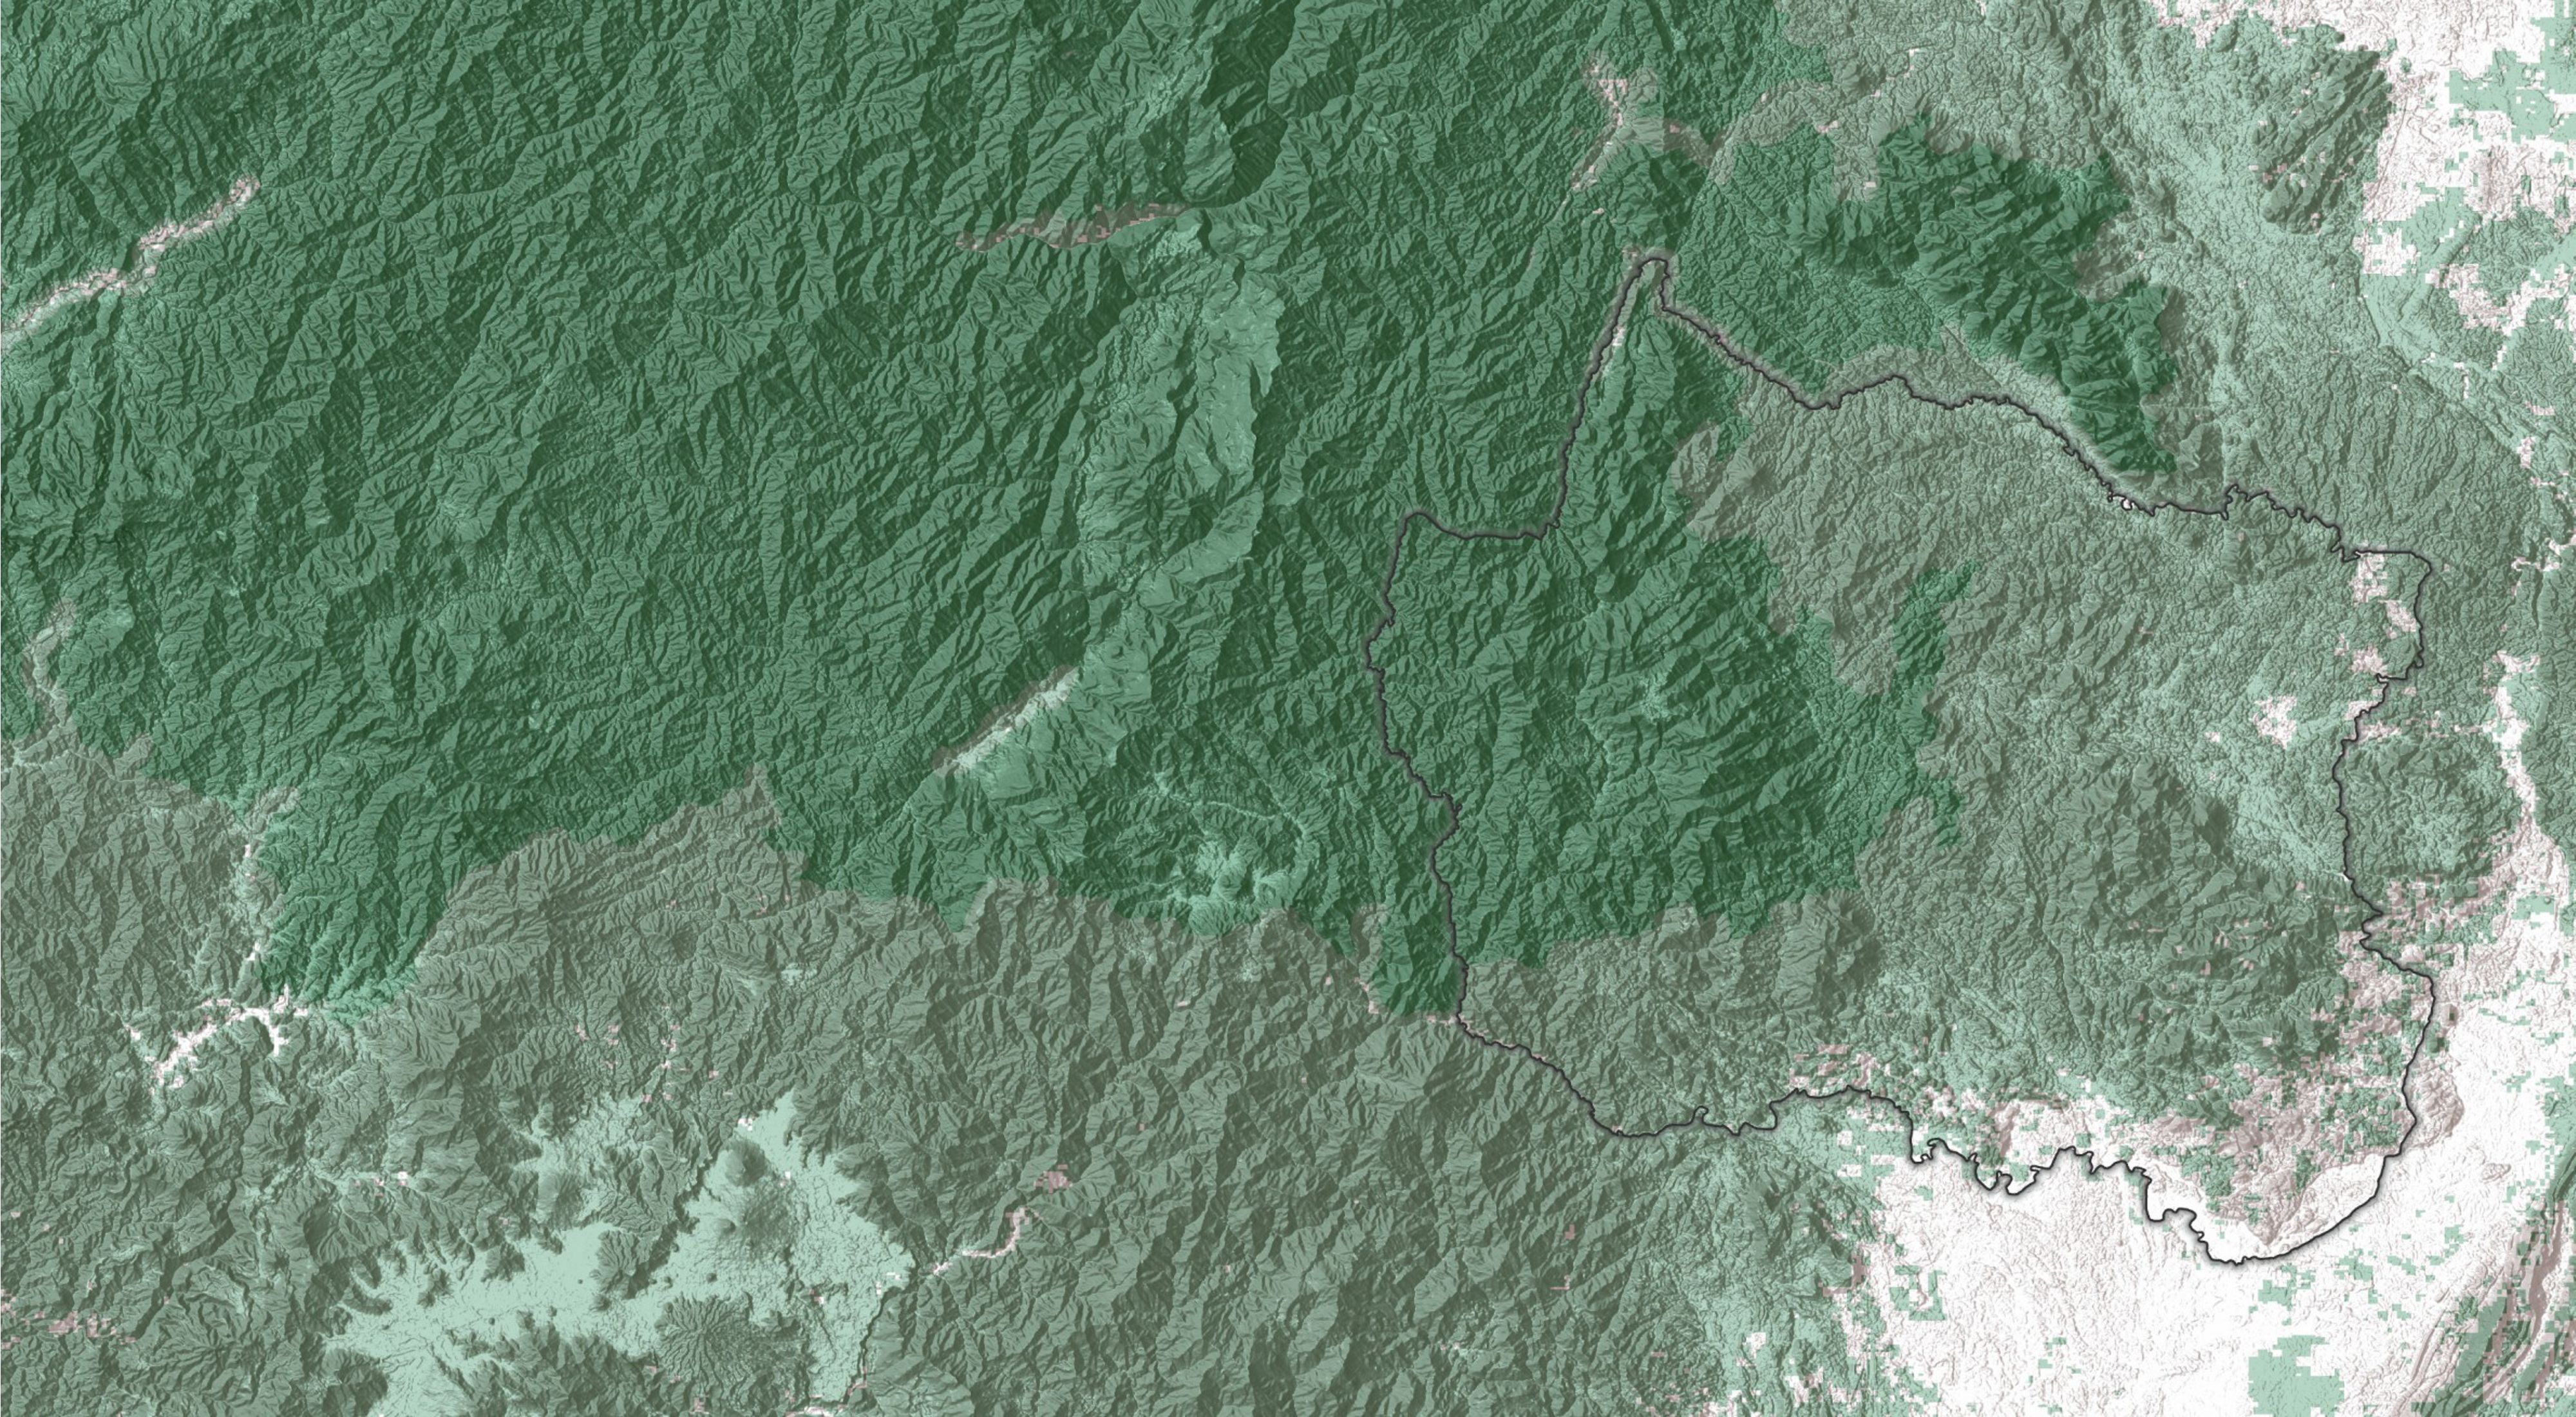 Topographical map of East Kalimantan, Indonesia on the island of Borneo.